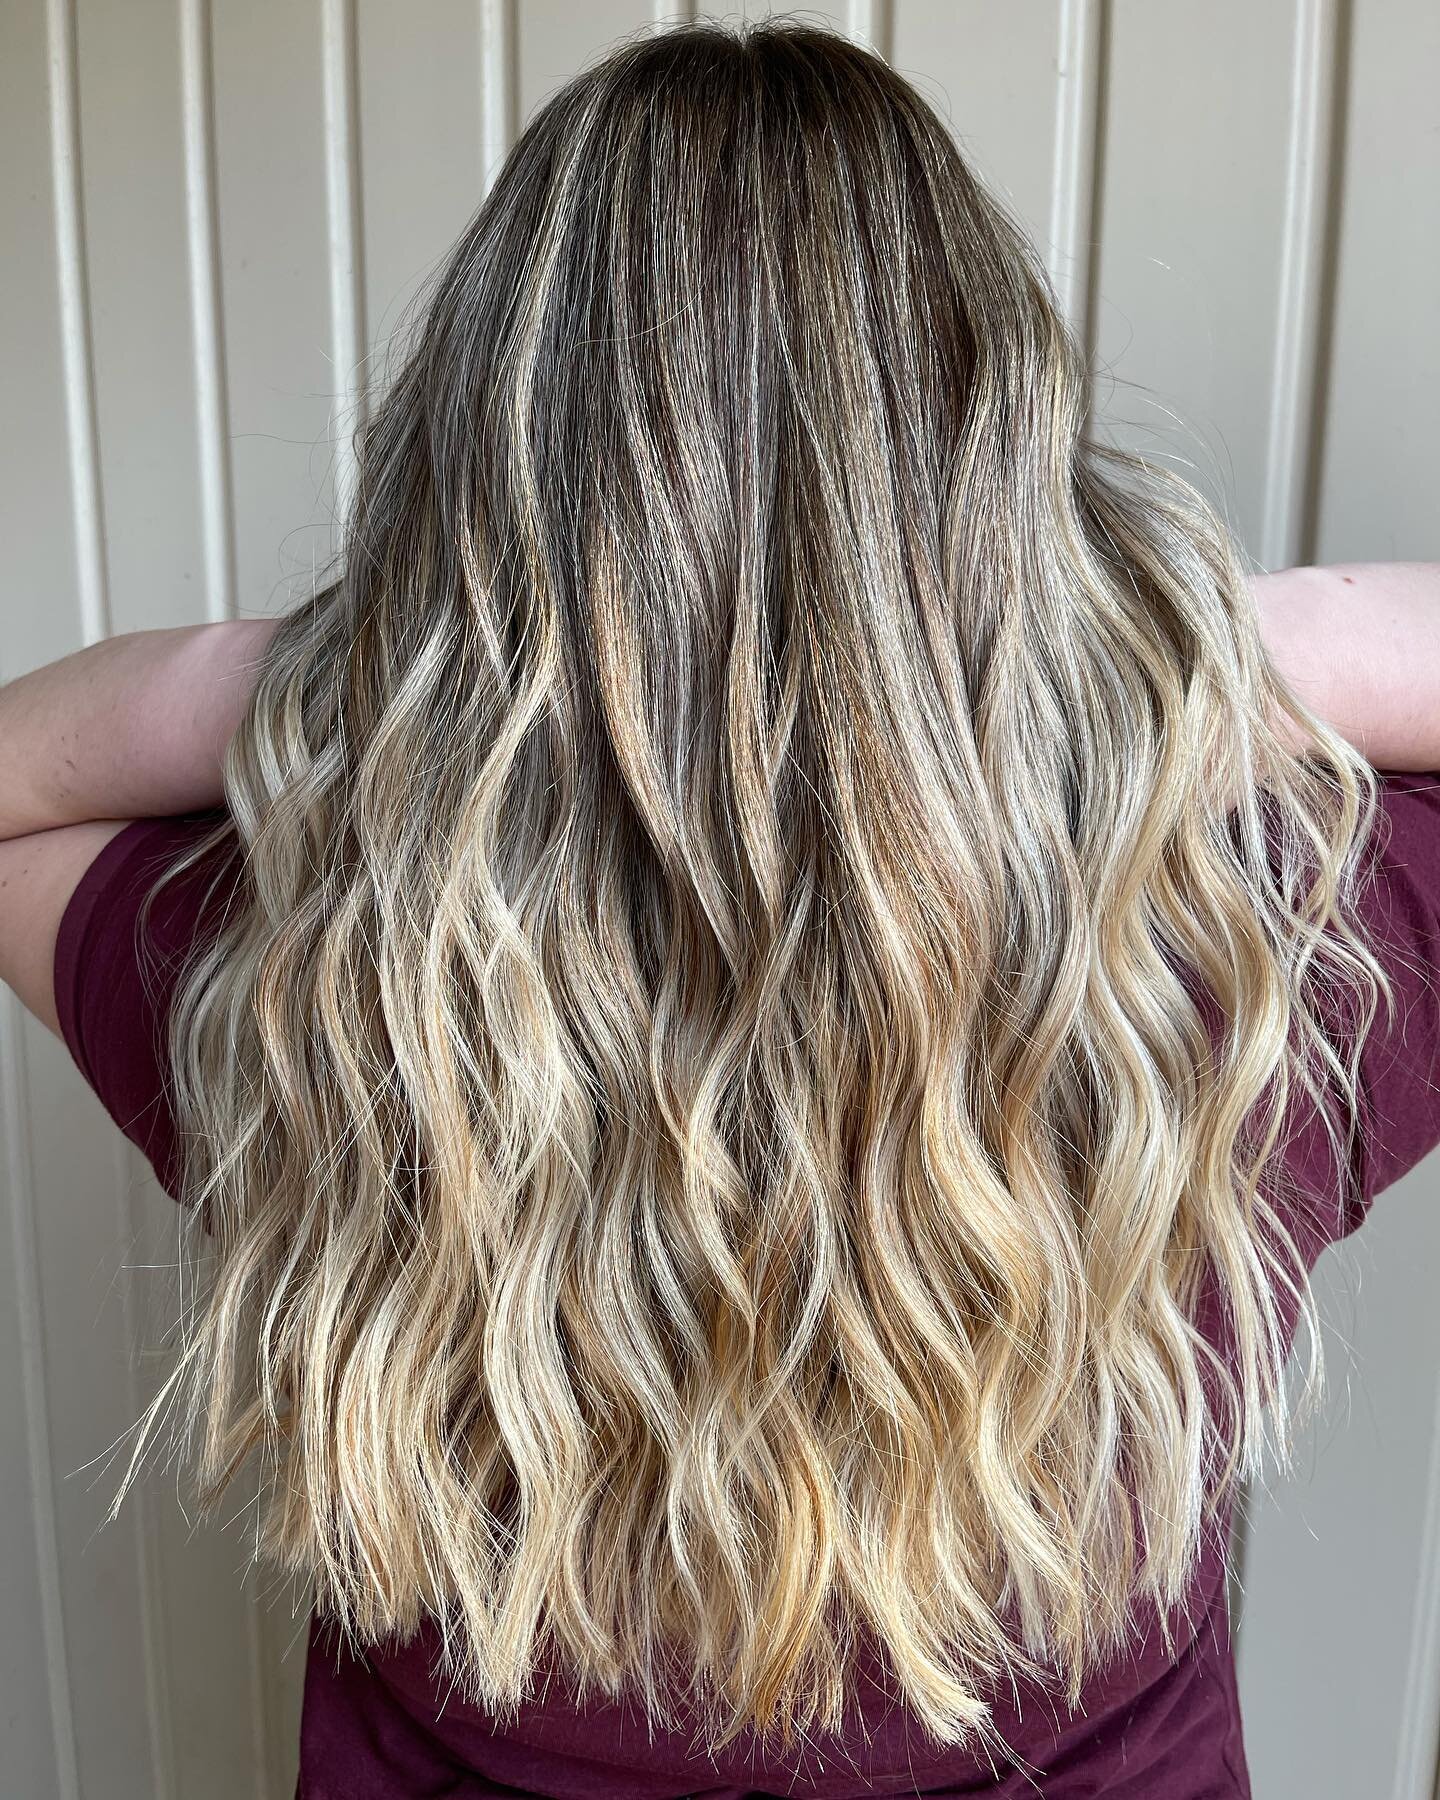 Blend corrected ✅ brightened ends ✅ transformed ✅ &bull;
&bull;
&bull;
&bull;
&bull;
&bull;
&bull;
#balayage #colorcorrection #colourmelt #colour #hairofinstagram #transformation #balayaged #rootshadow #blondebalayage #hairbydrea #andreaosztrohair